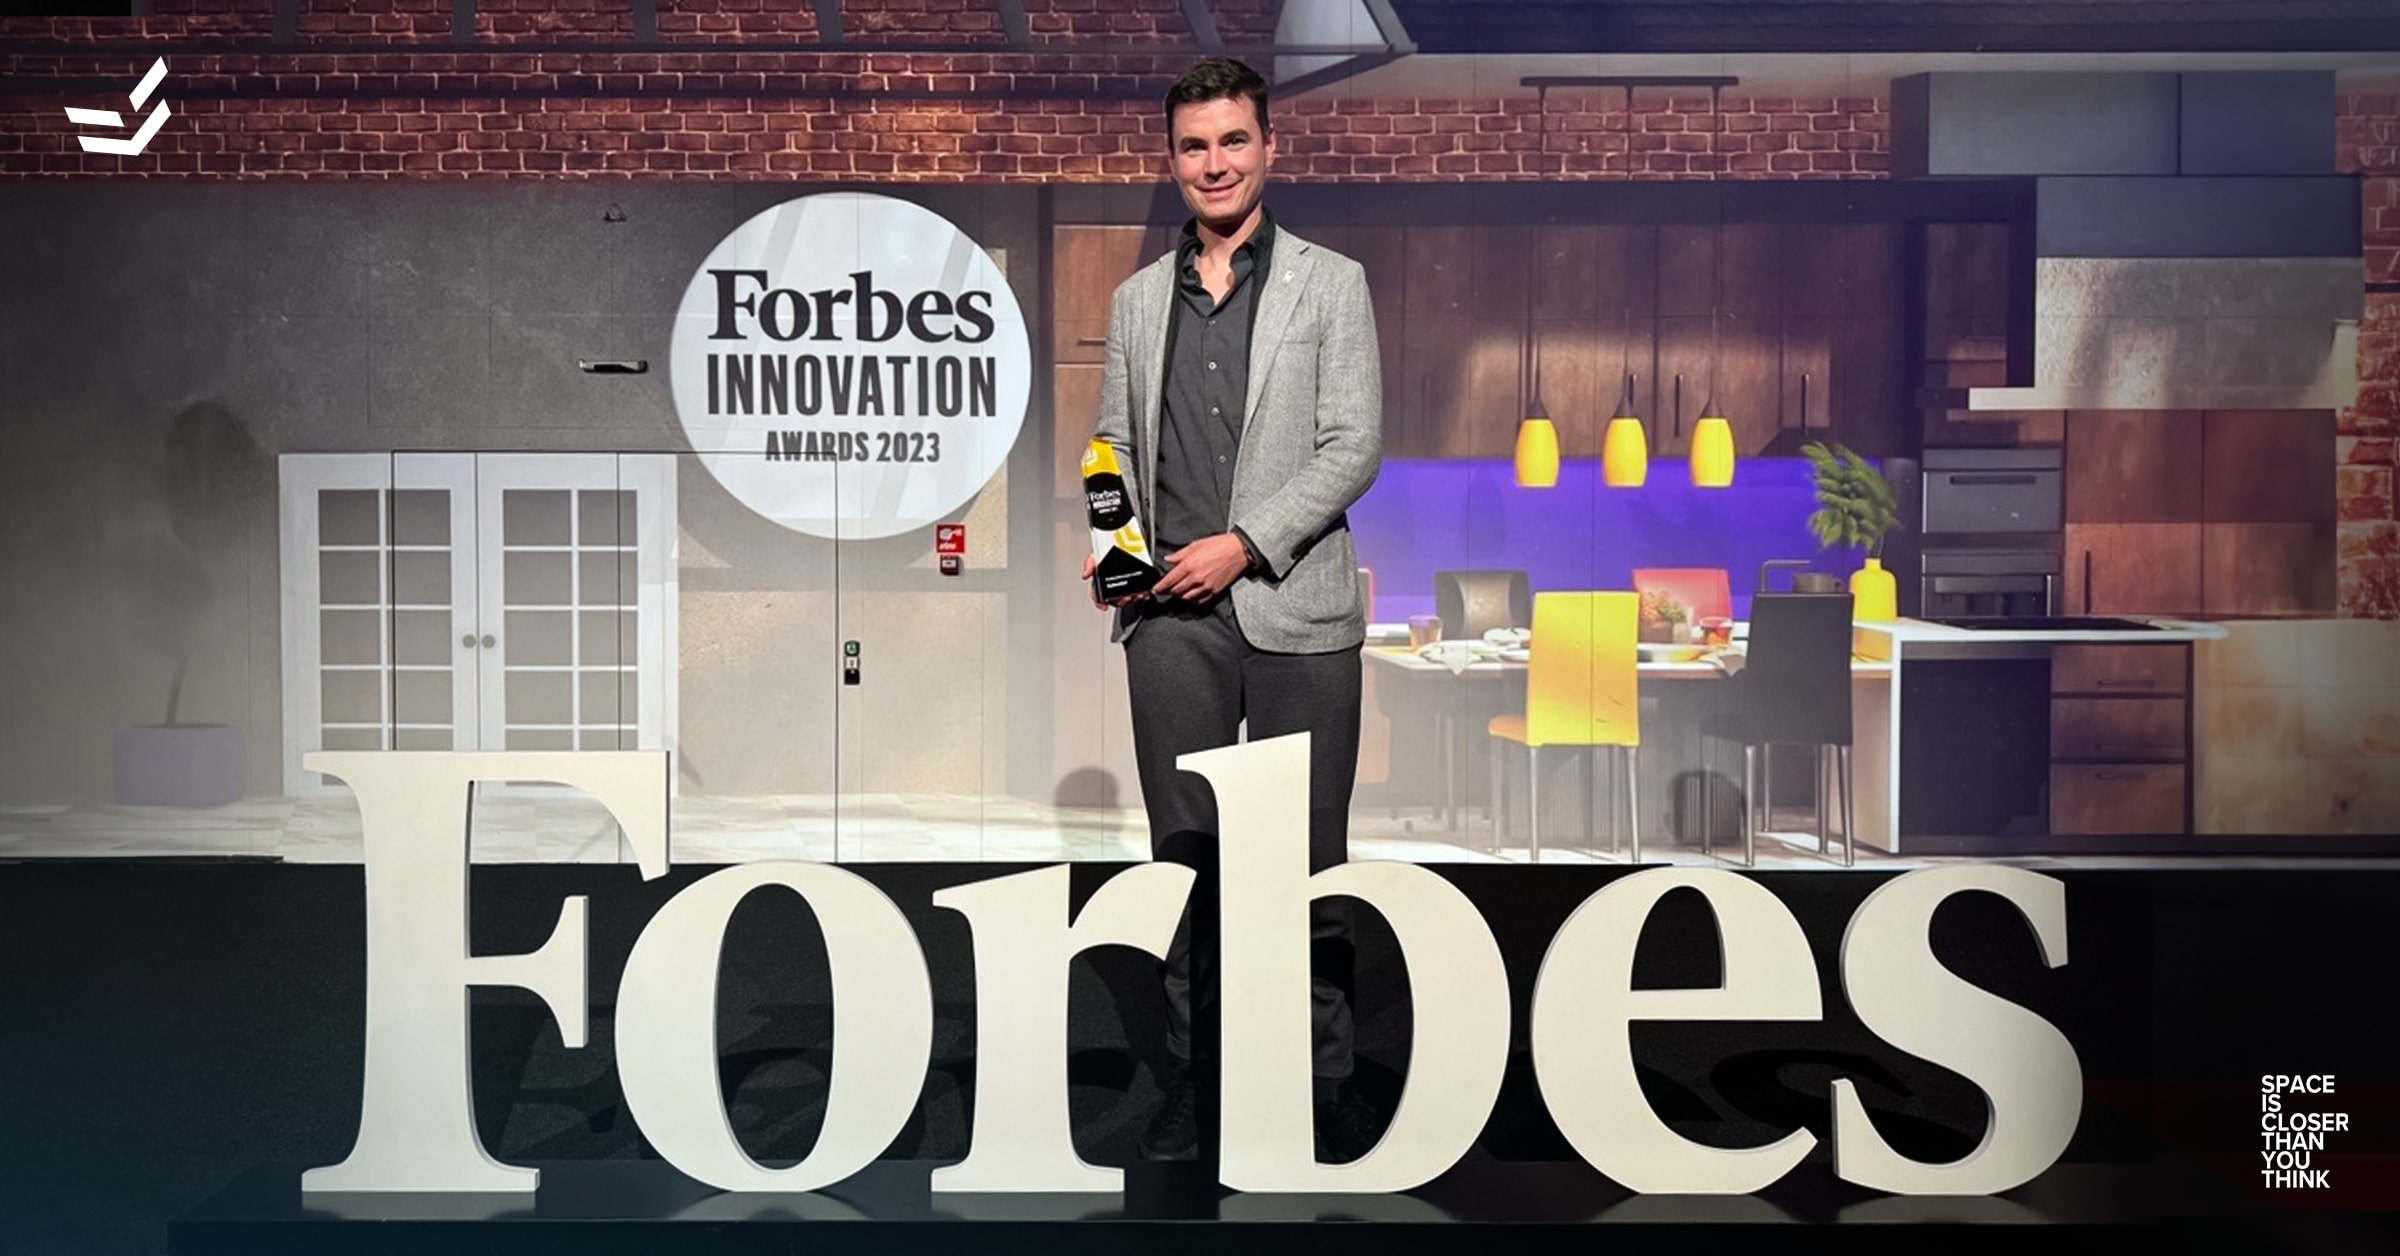 EnduroSat wins Innovative Service of the Year by Forbes 2